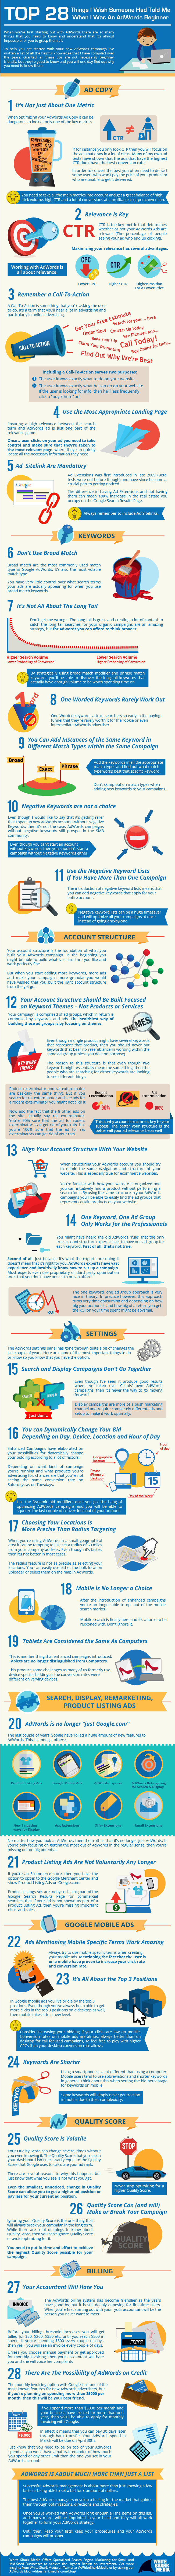 28 Tips For AdWords Beginners I Wish Someone Had Told Me – An infographic by the team at WhiteSharkMedia AdWords Blog